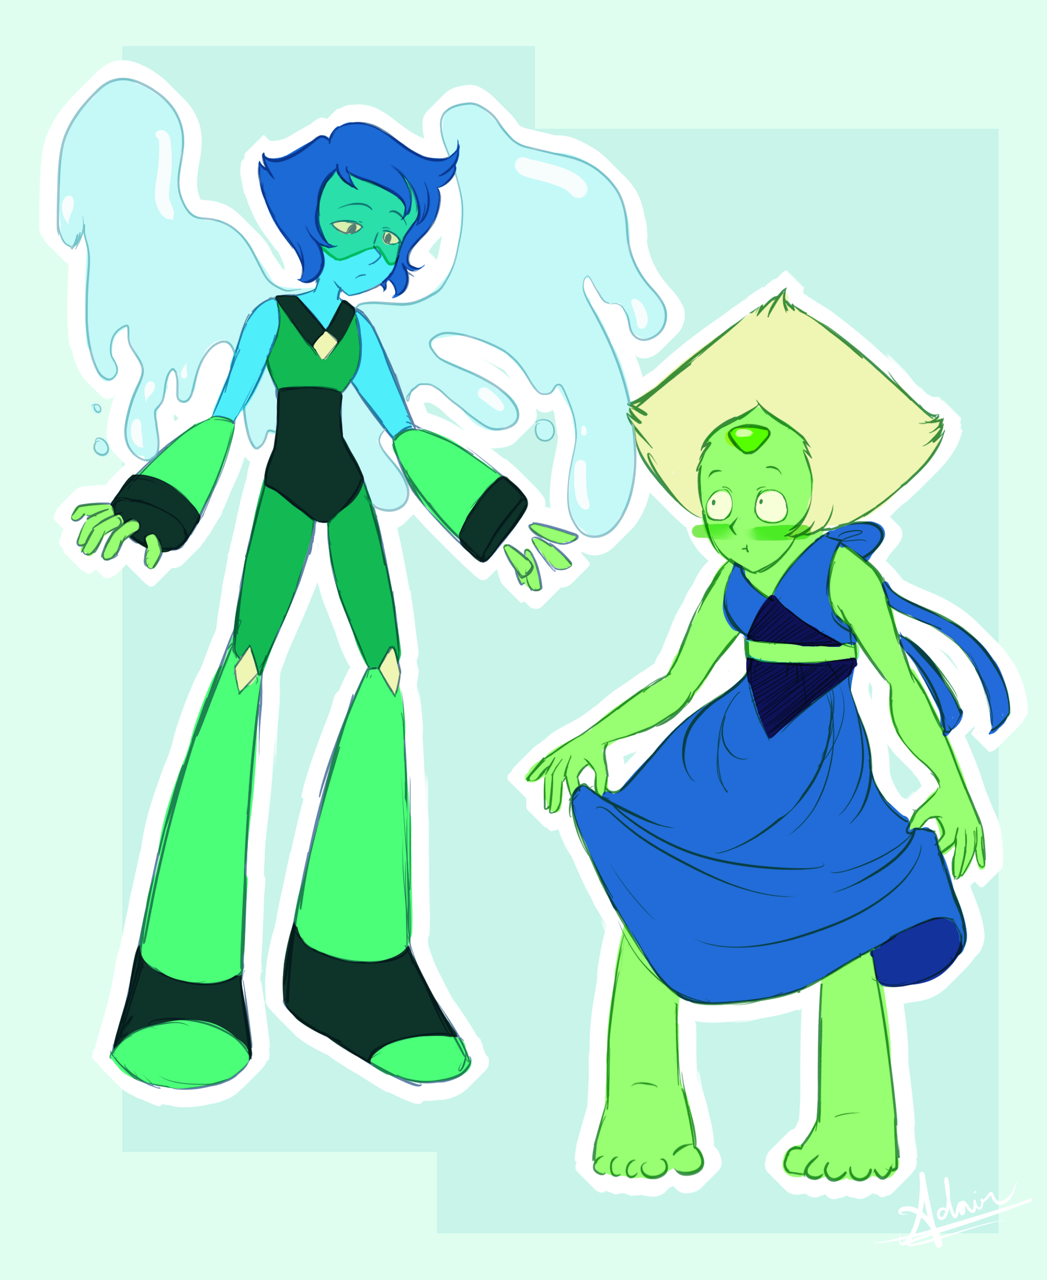 some lapidot that i would normally upload to my non-kink art blog but i didnt feel like switching to my other account